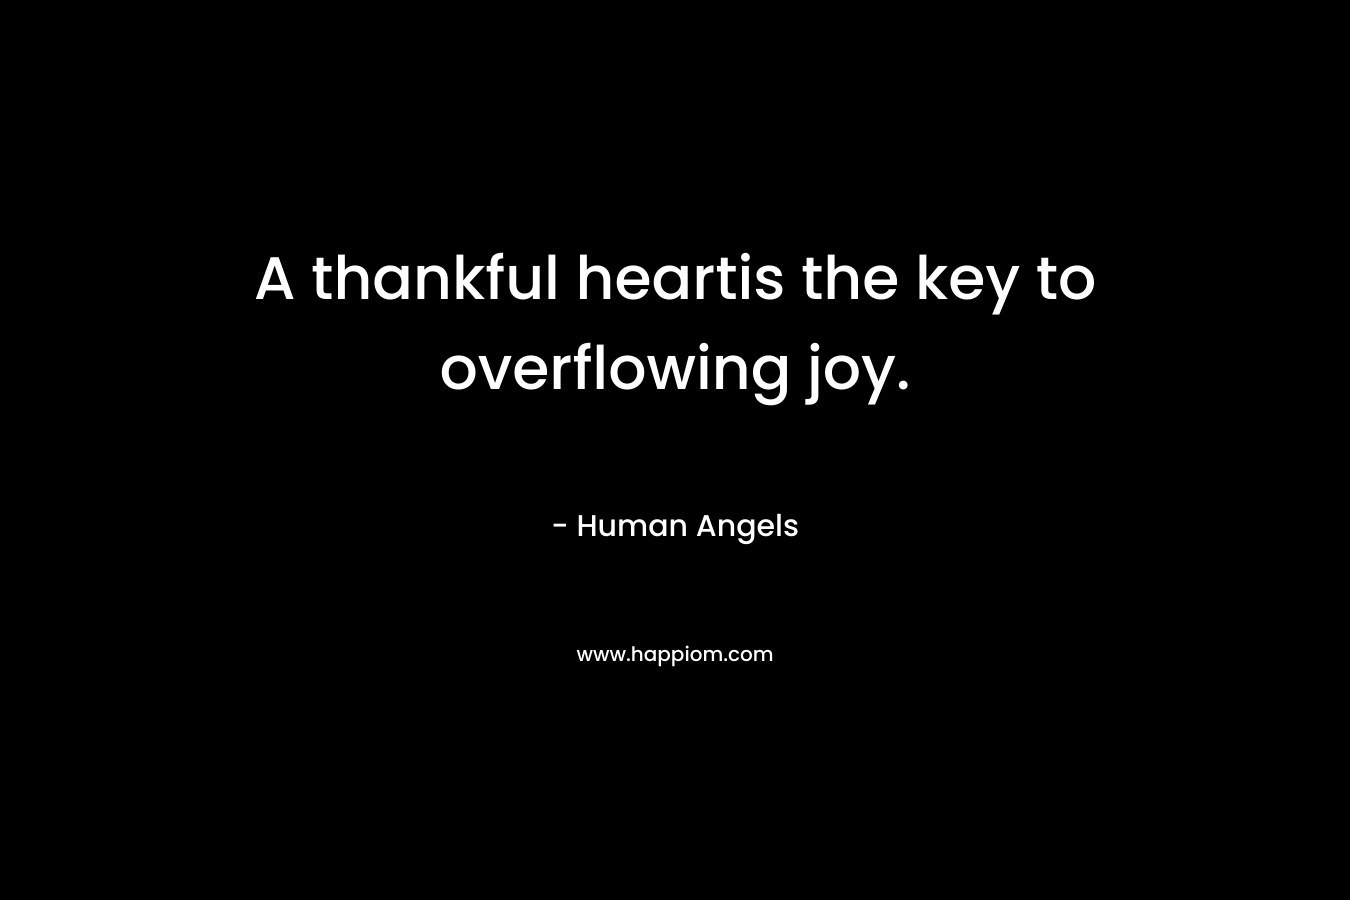 A thankful heartis the key to overflowing joy.